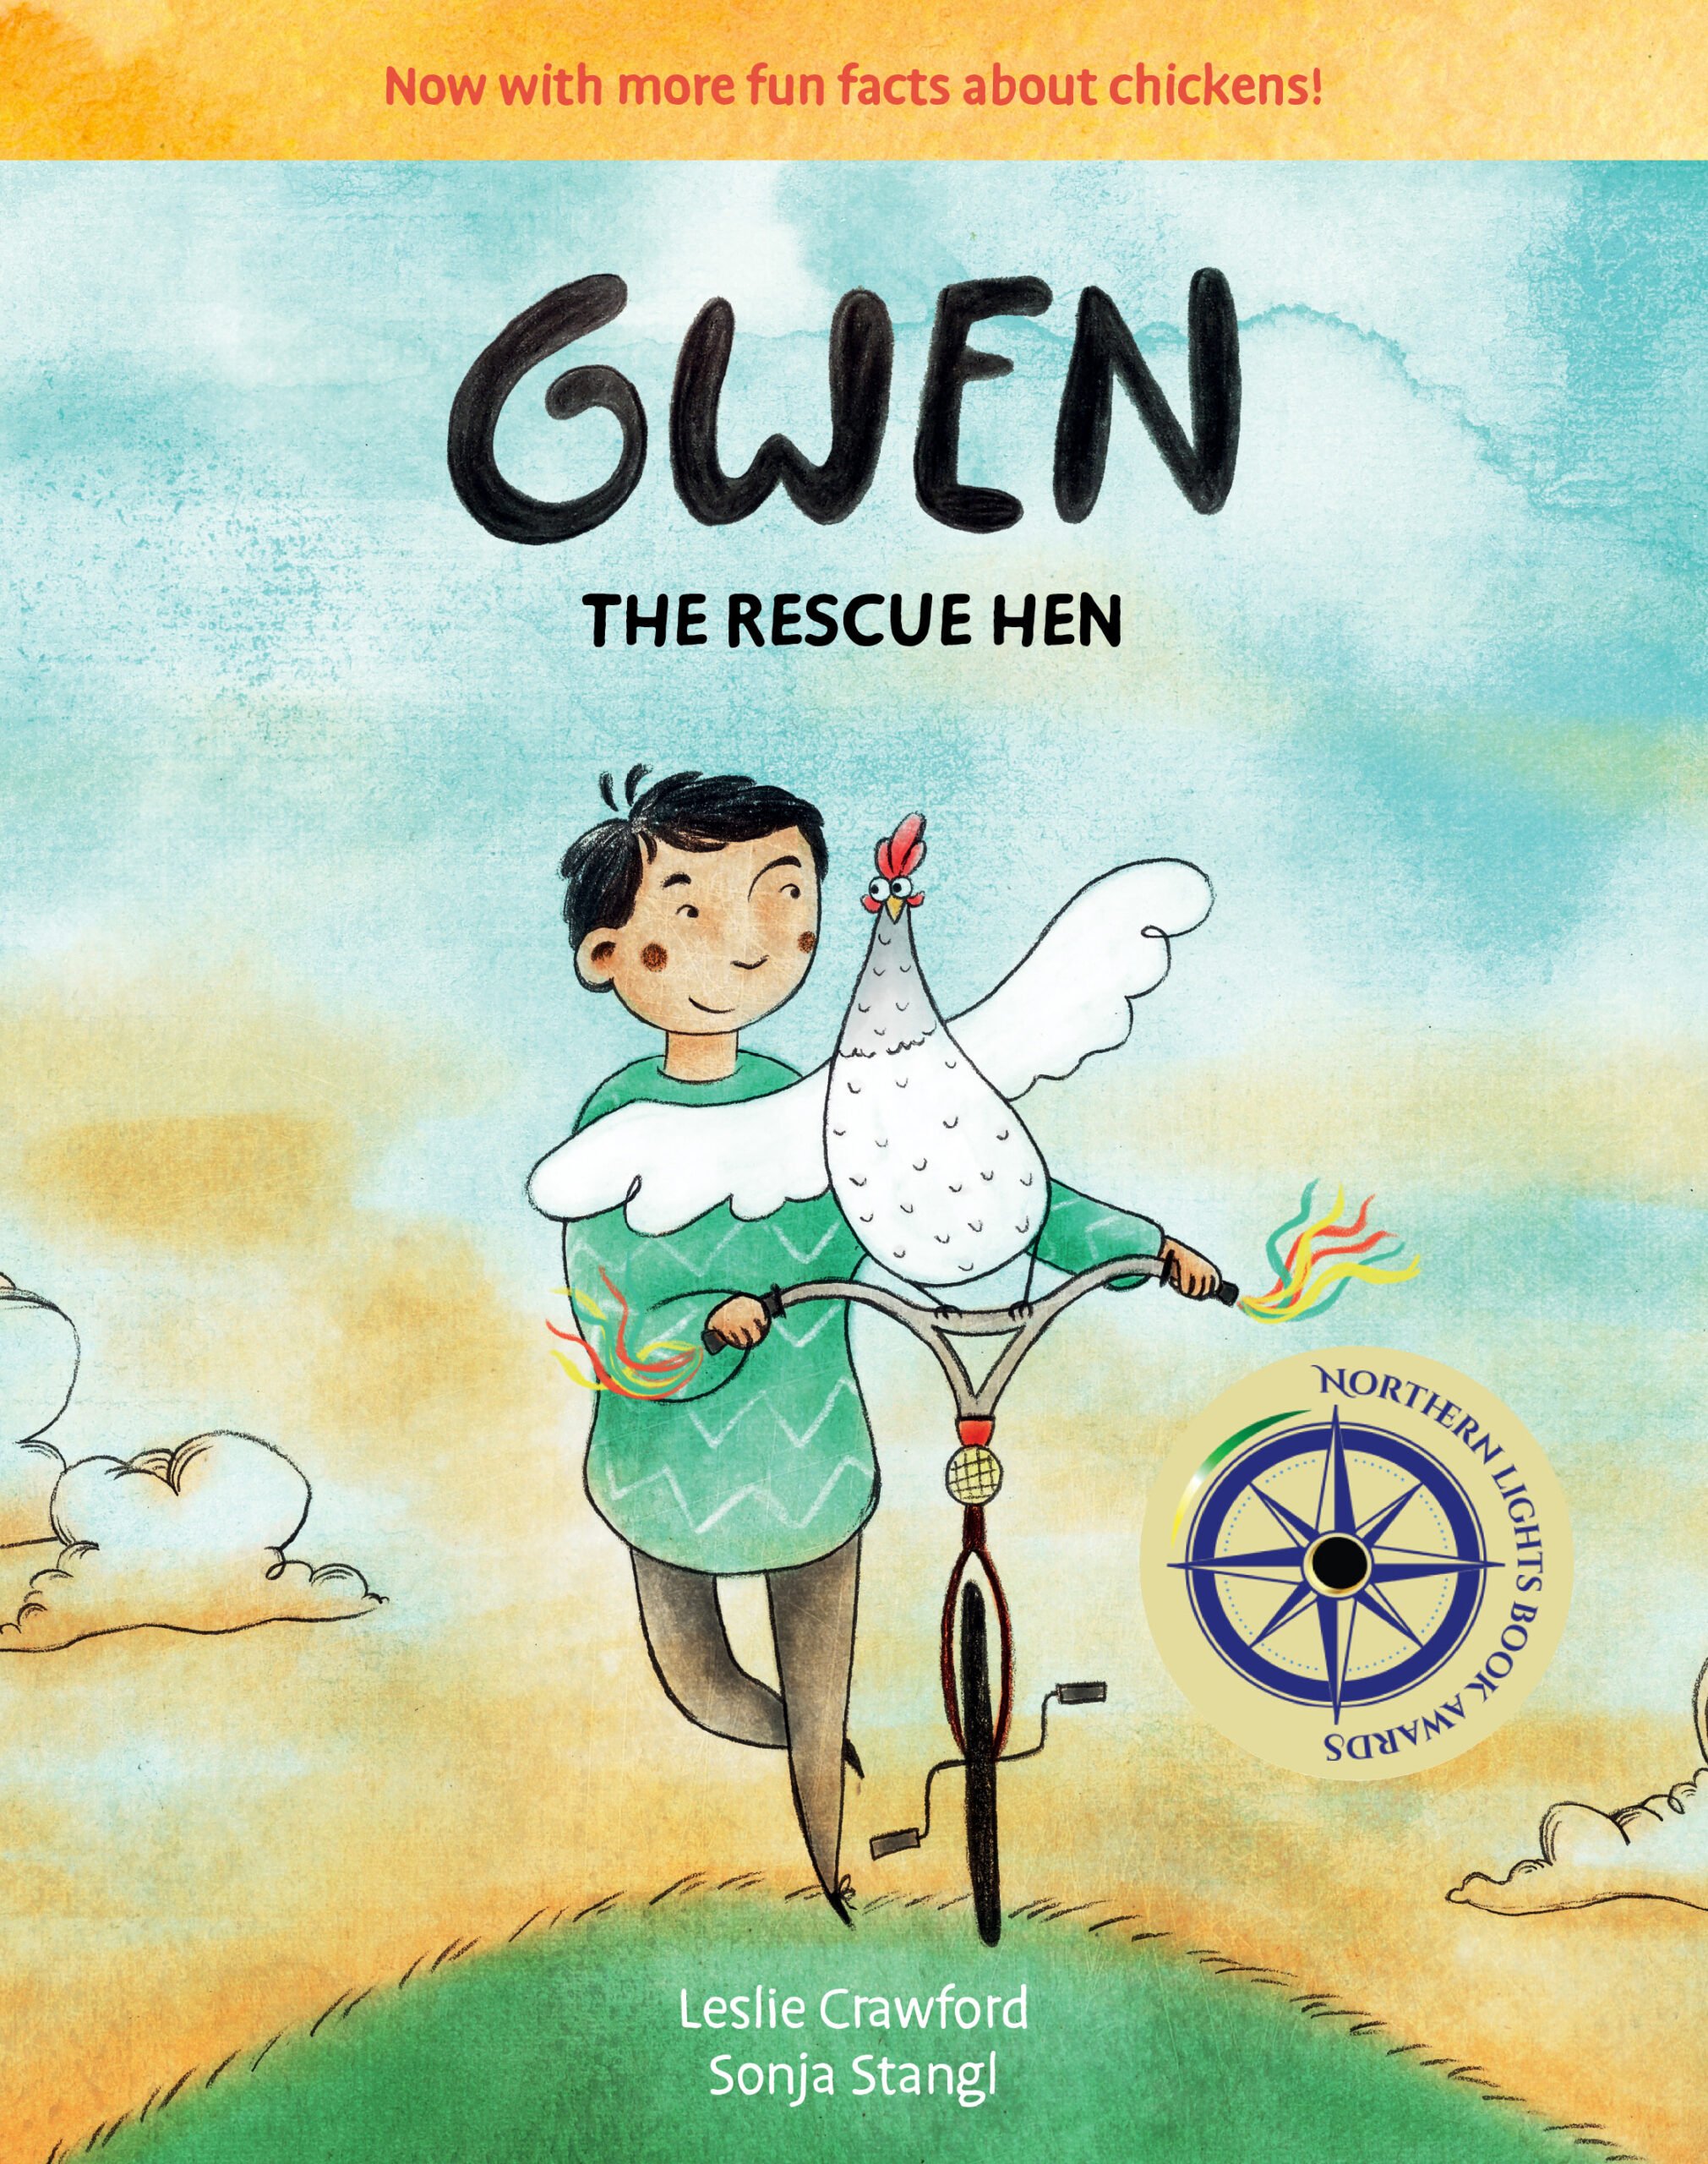 The Gwen the Rescue Hen cover